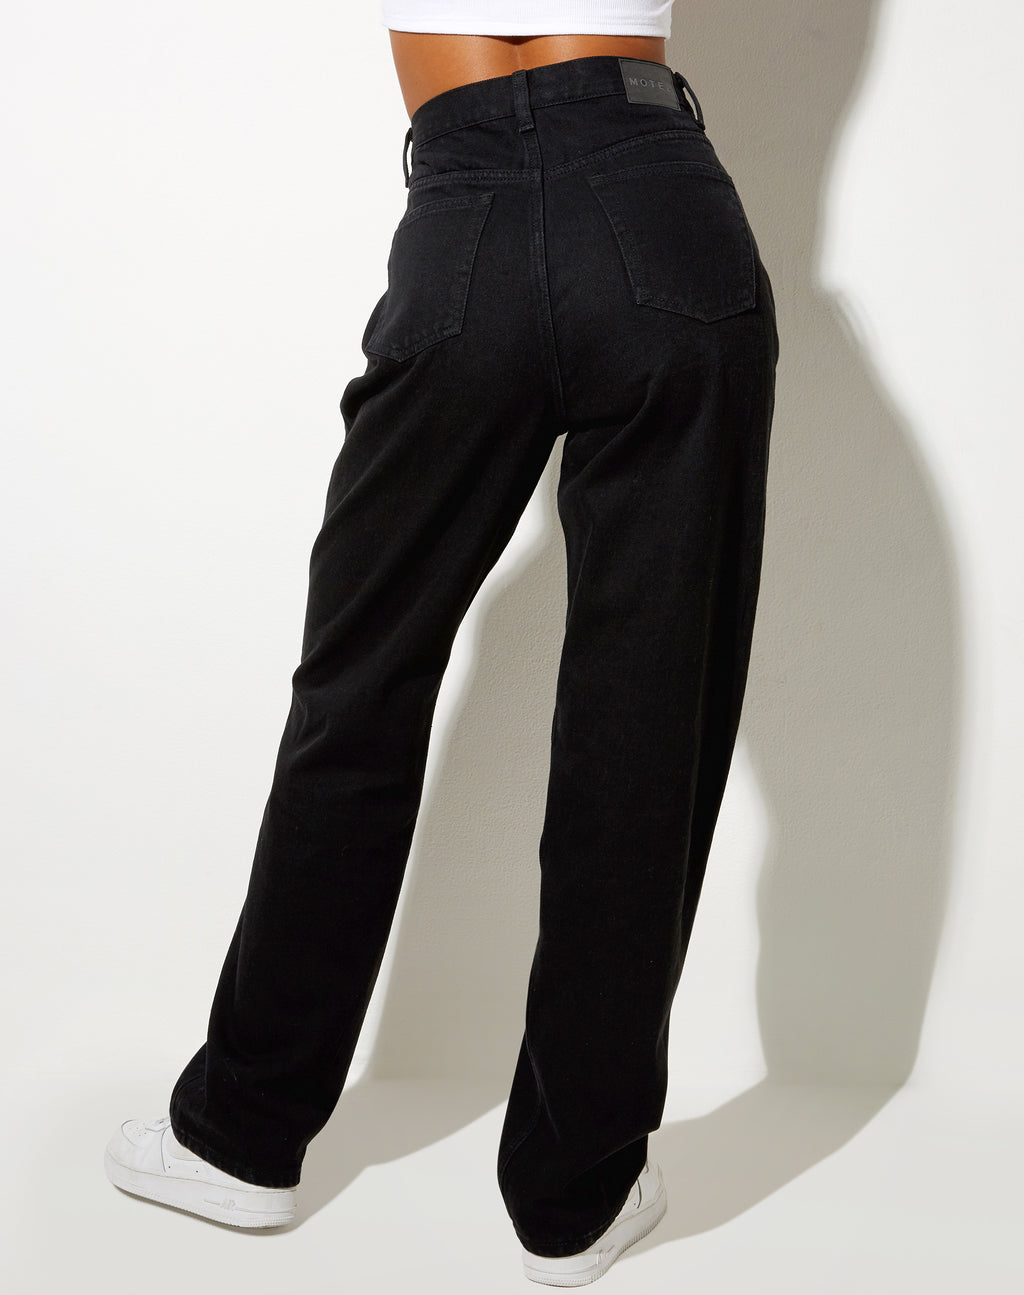 Pleated Jeans in Black Wash